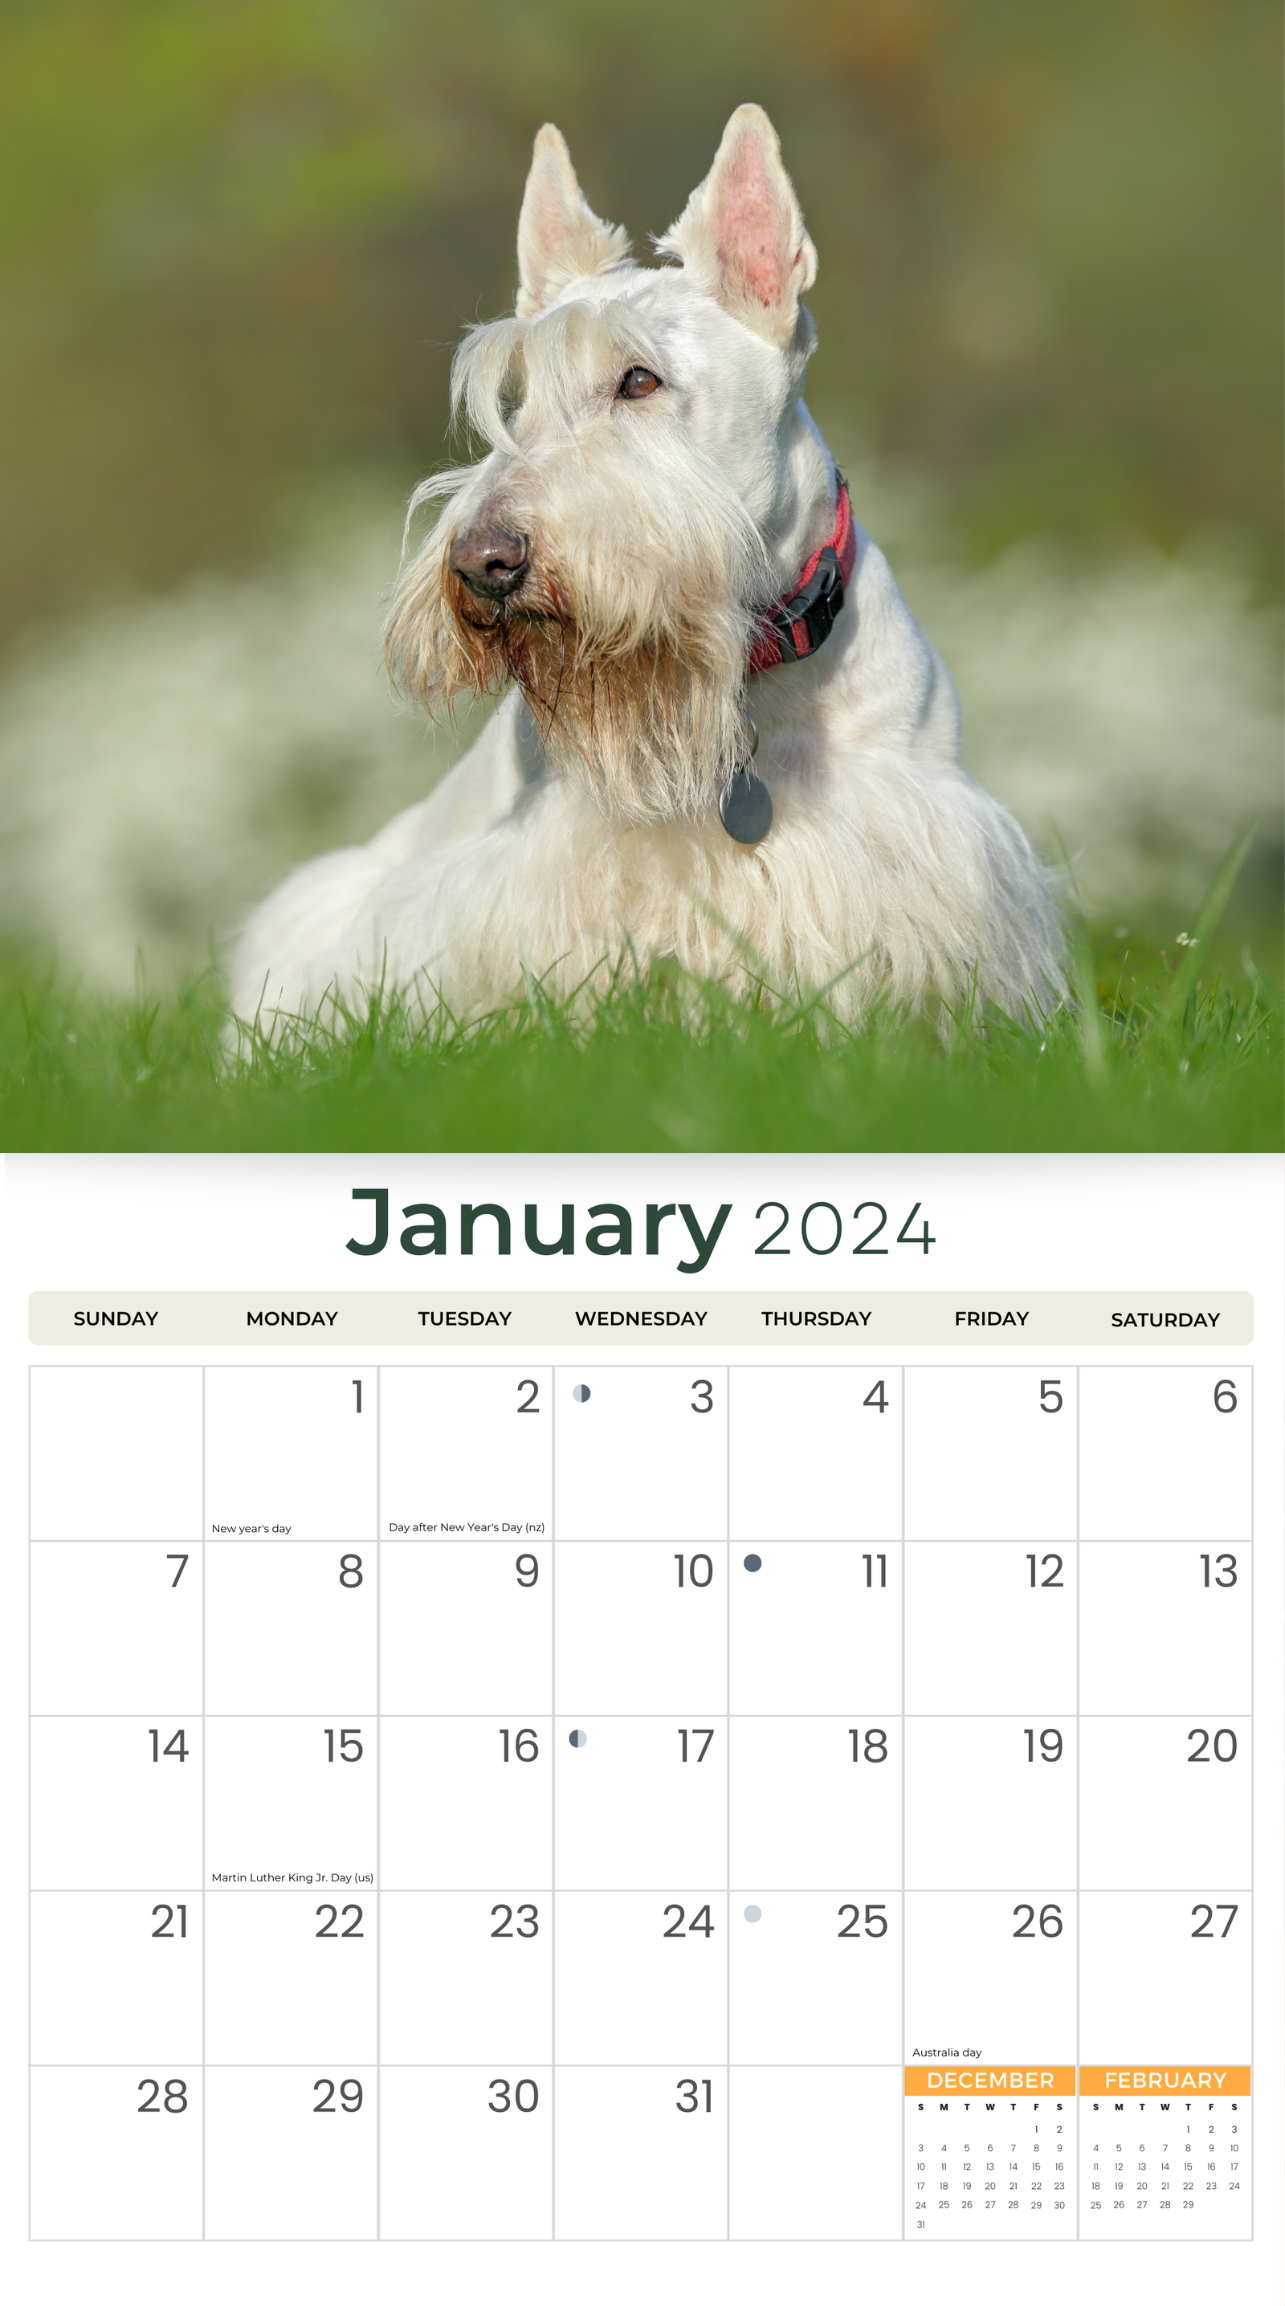 2024 Scotties (Scottish Terriers) Dogs & Puppies - Deluxe Wall Calendar by Just Calendars - 16 Month - Plastic Free